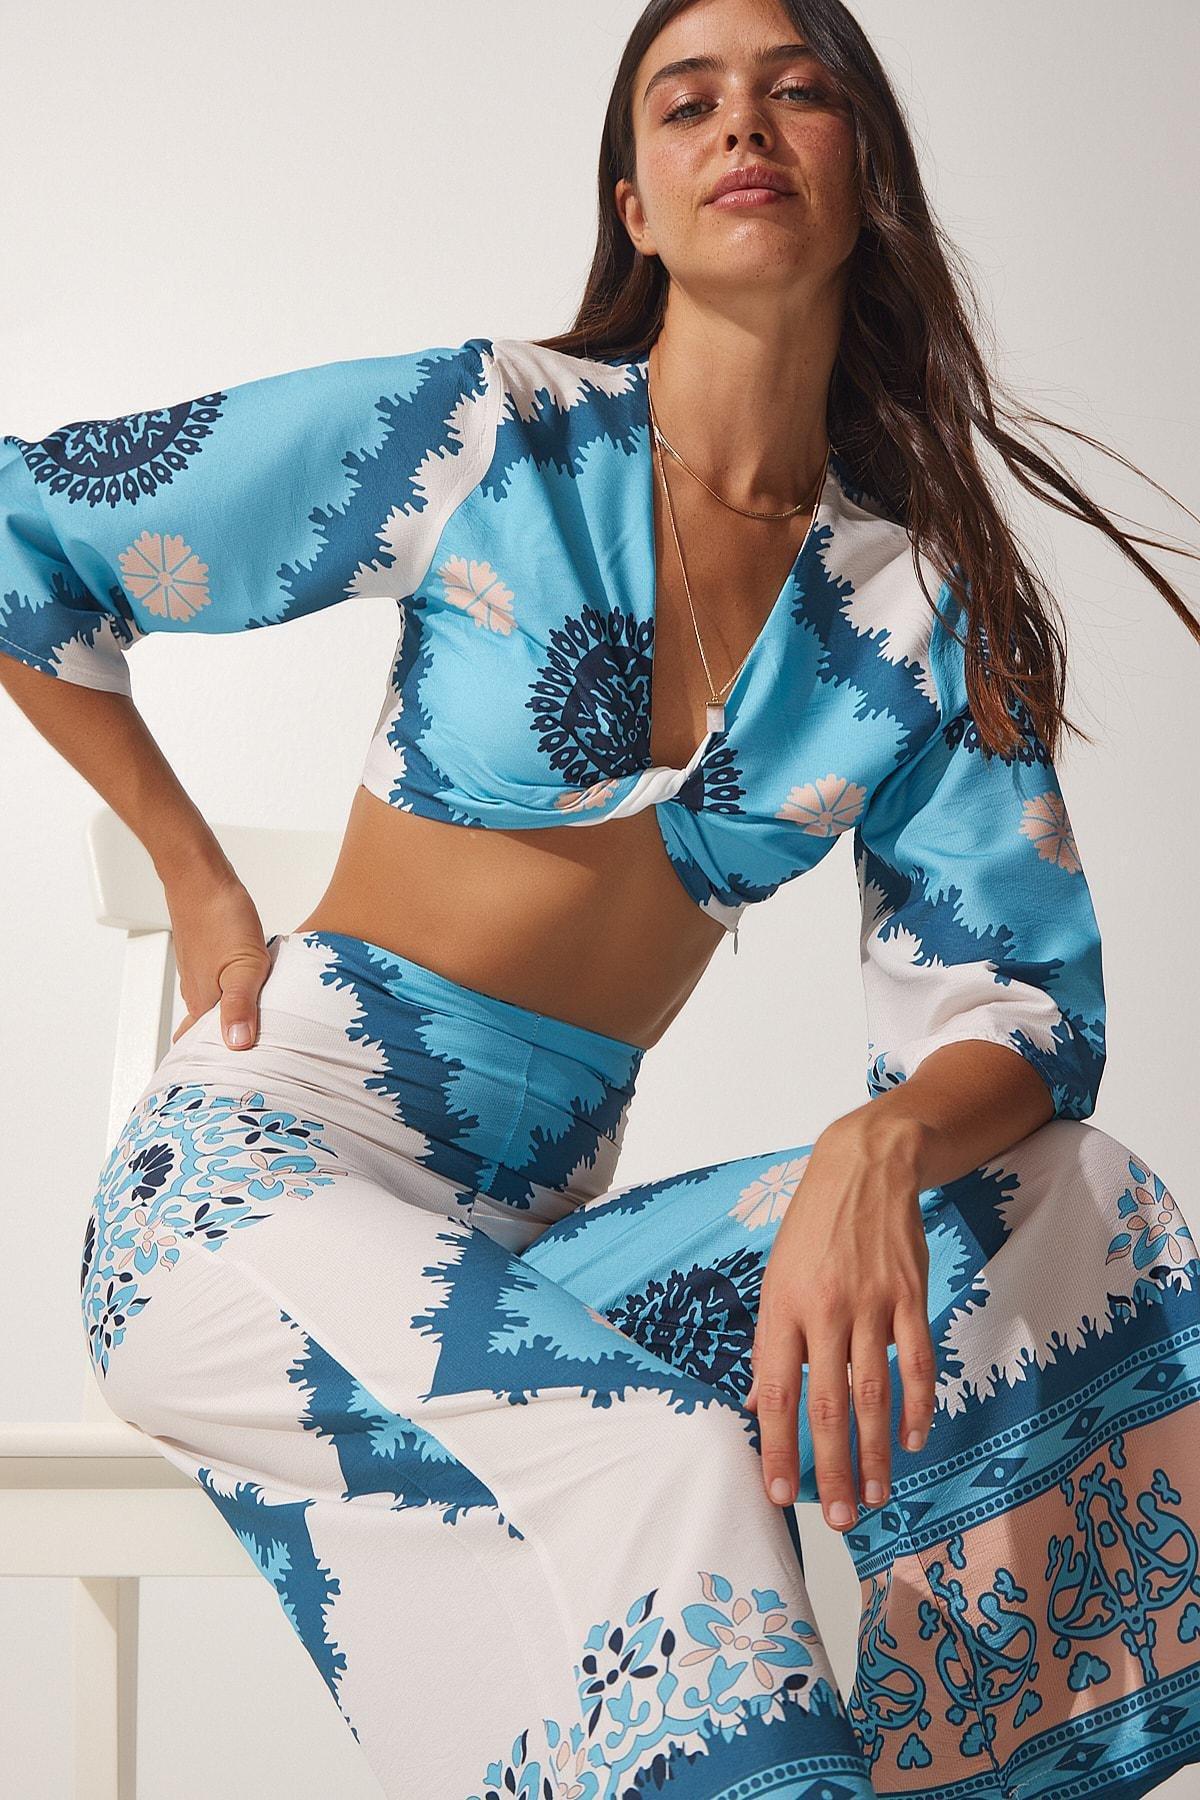 Happiness Istanbul - Blue Patterned Summer Co-Ord Set